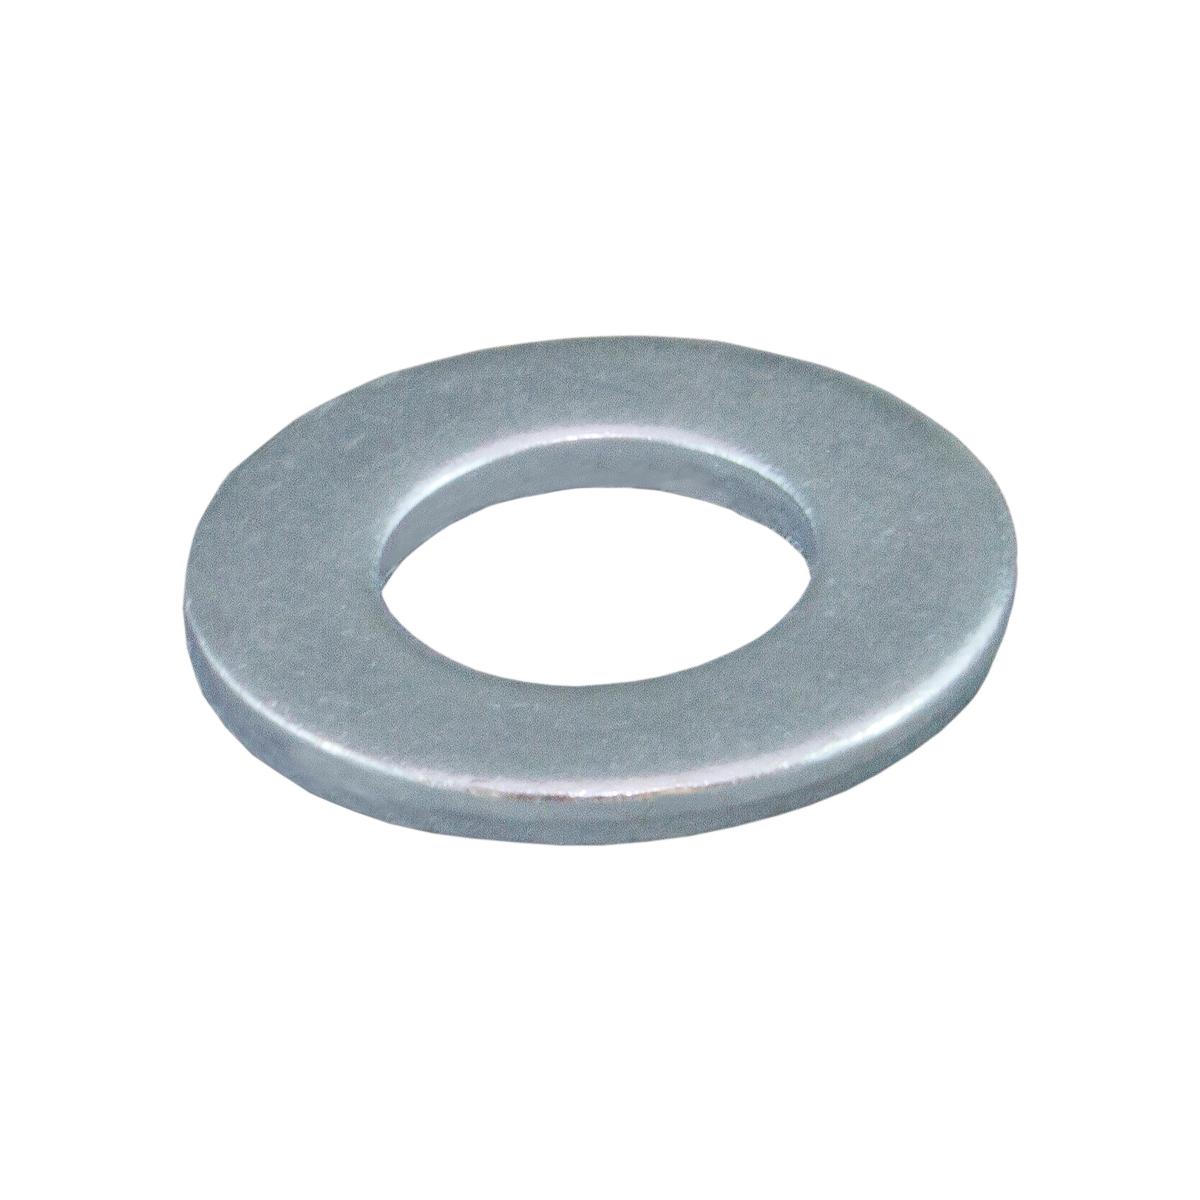 FLAT WASHER 6MM HDG